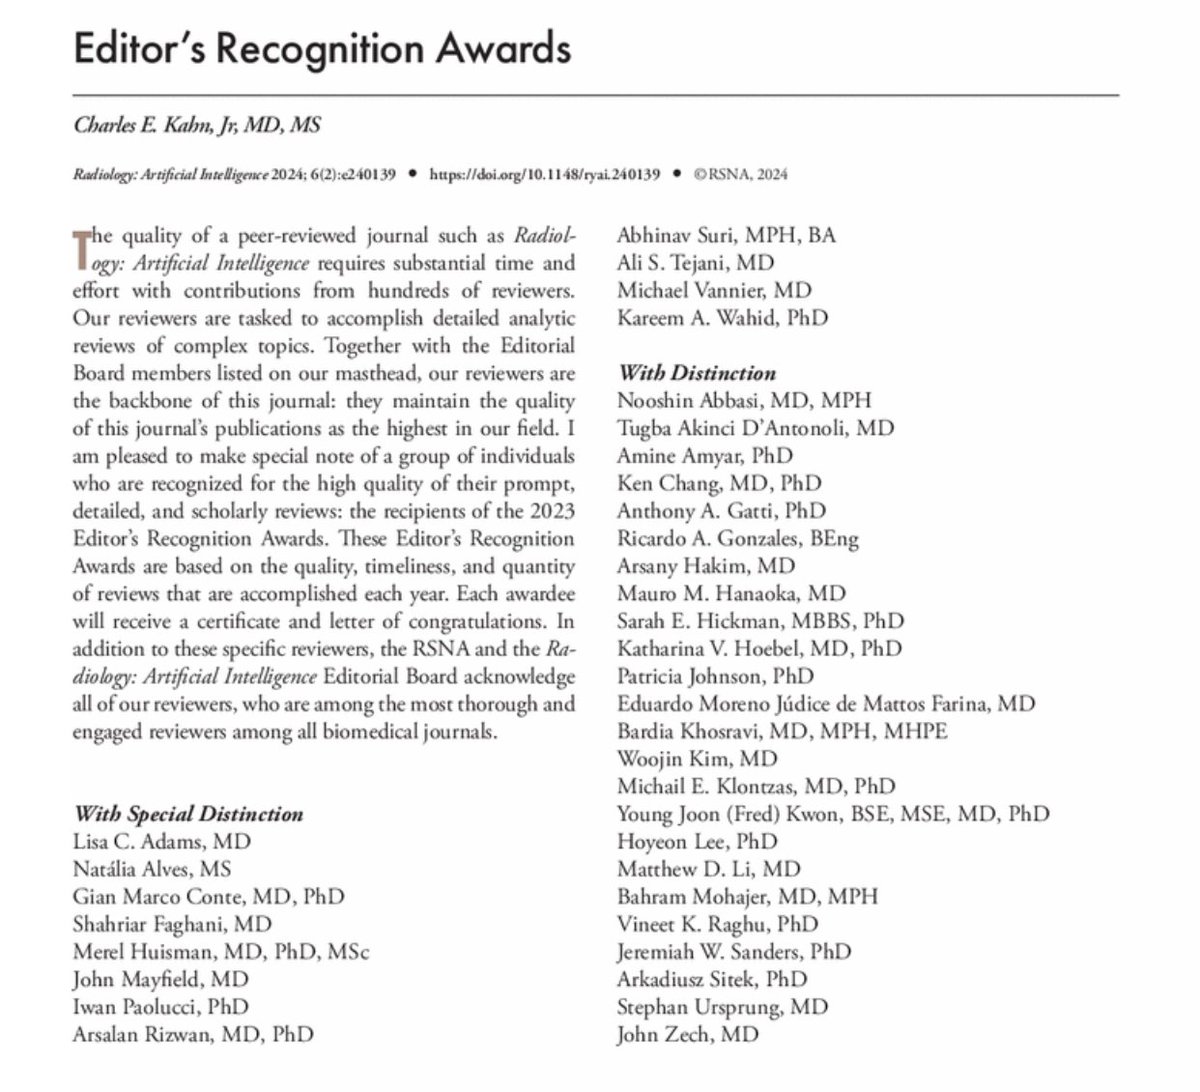 Congratulations to all those receiving @Radiology_AI Editor's Recognition Awards! Thank you @cekahn and the Editorial Board for your leadership! @RSNA @radiology_rsna #AI